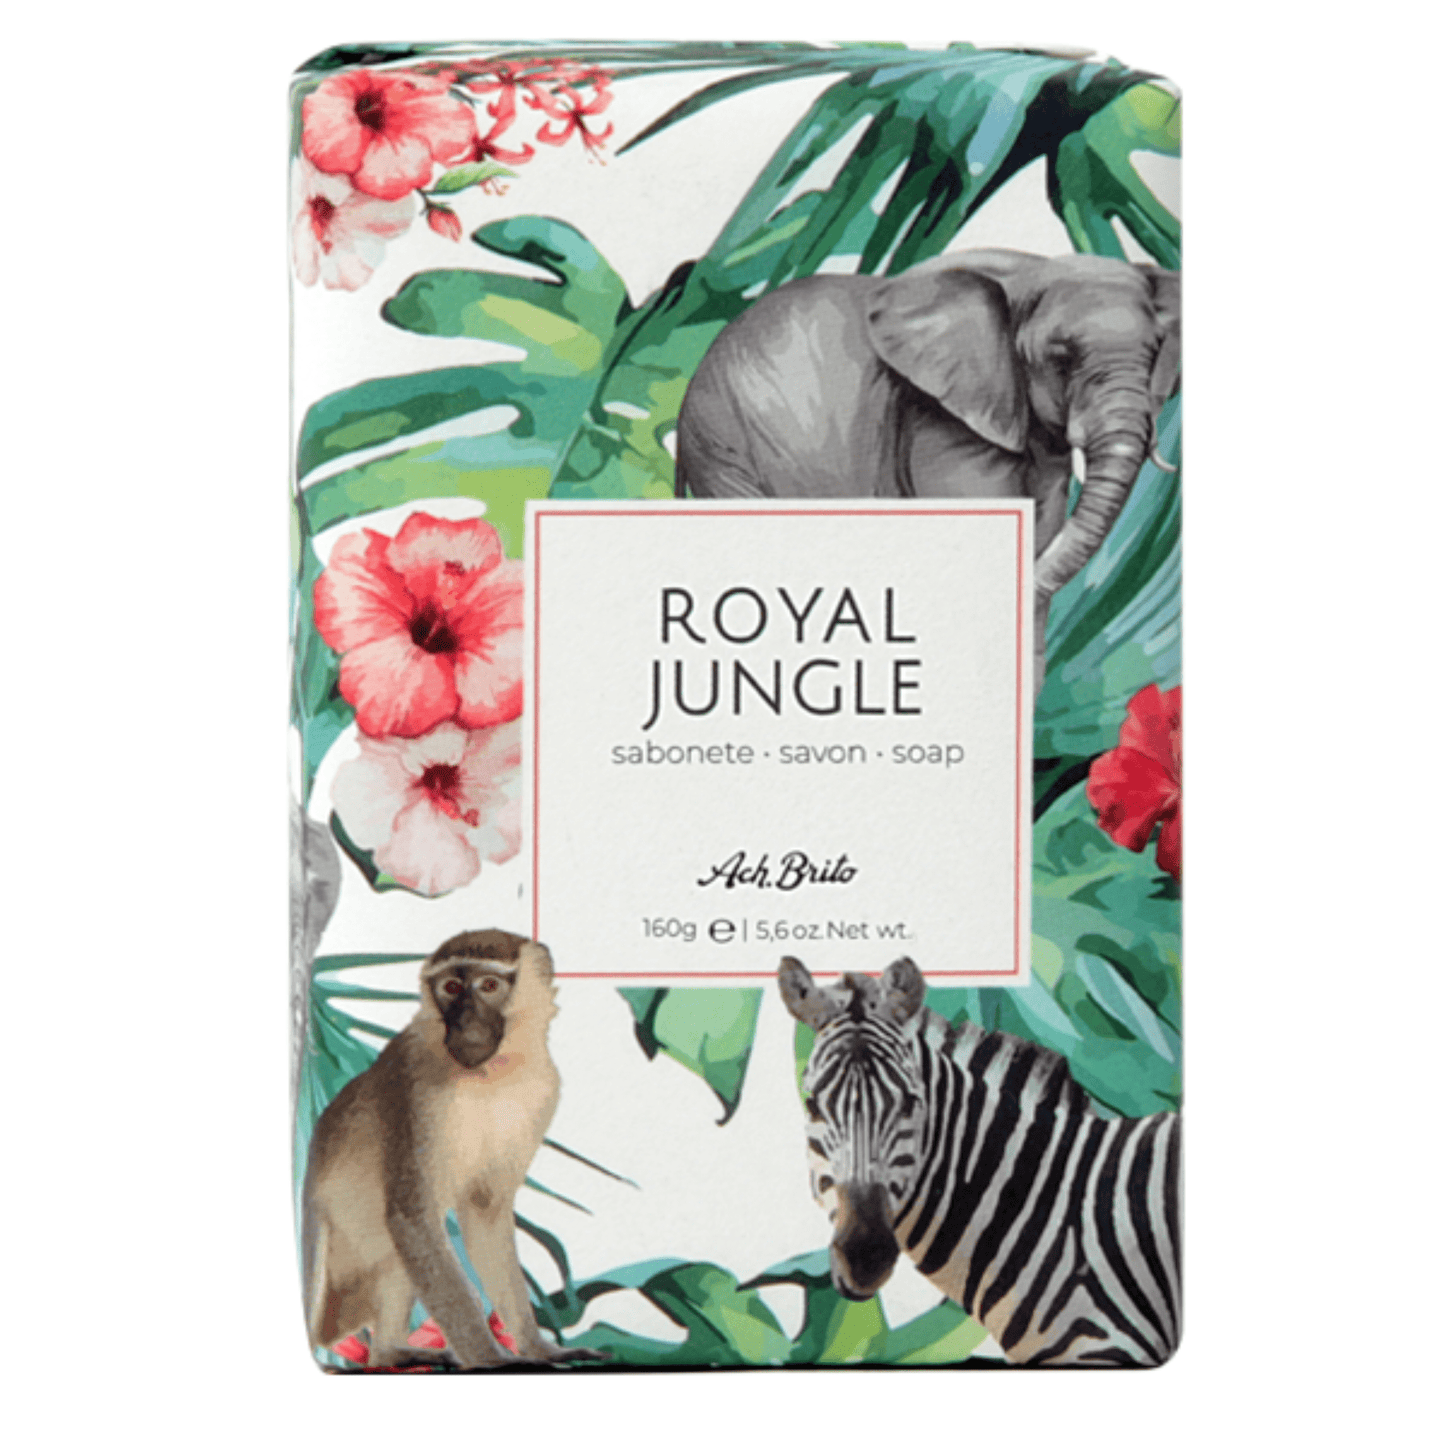 Primary Image of Royal Jungle Soap